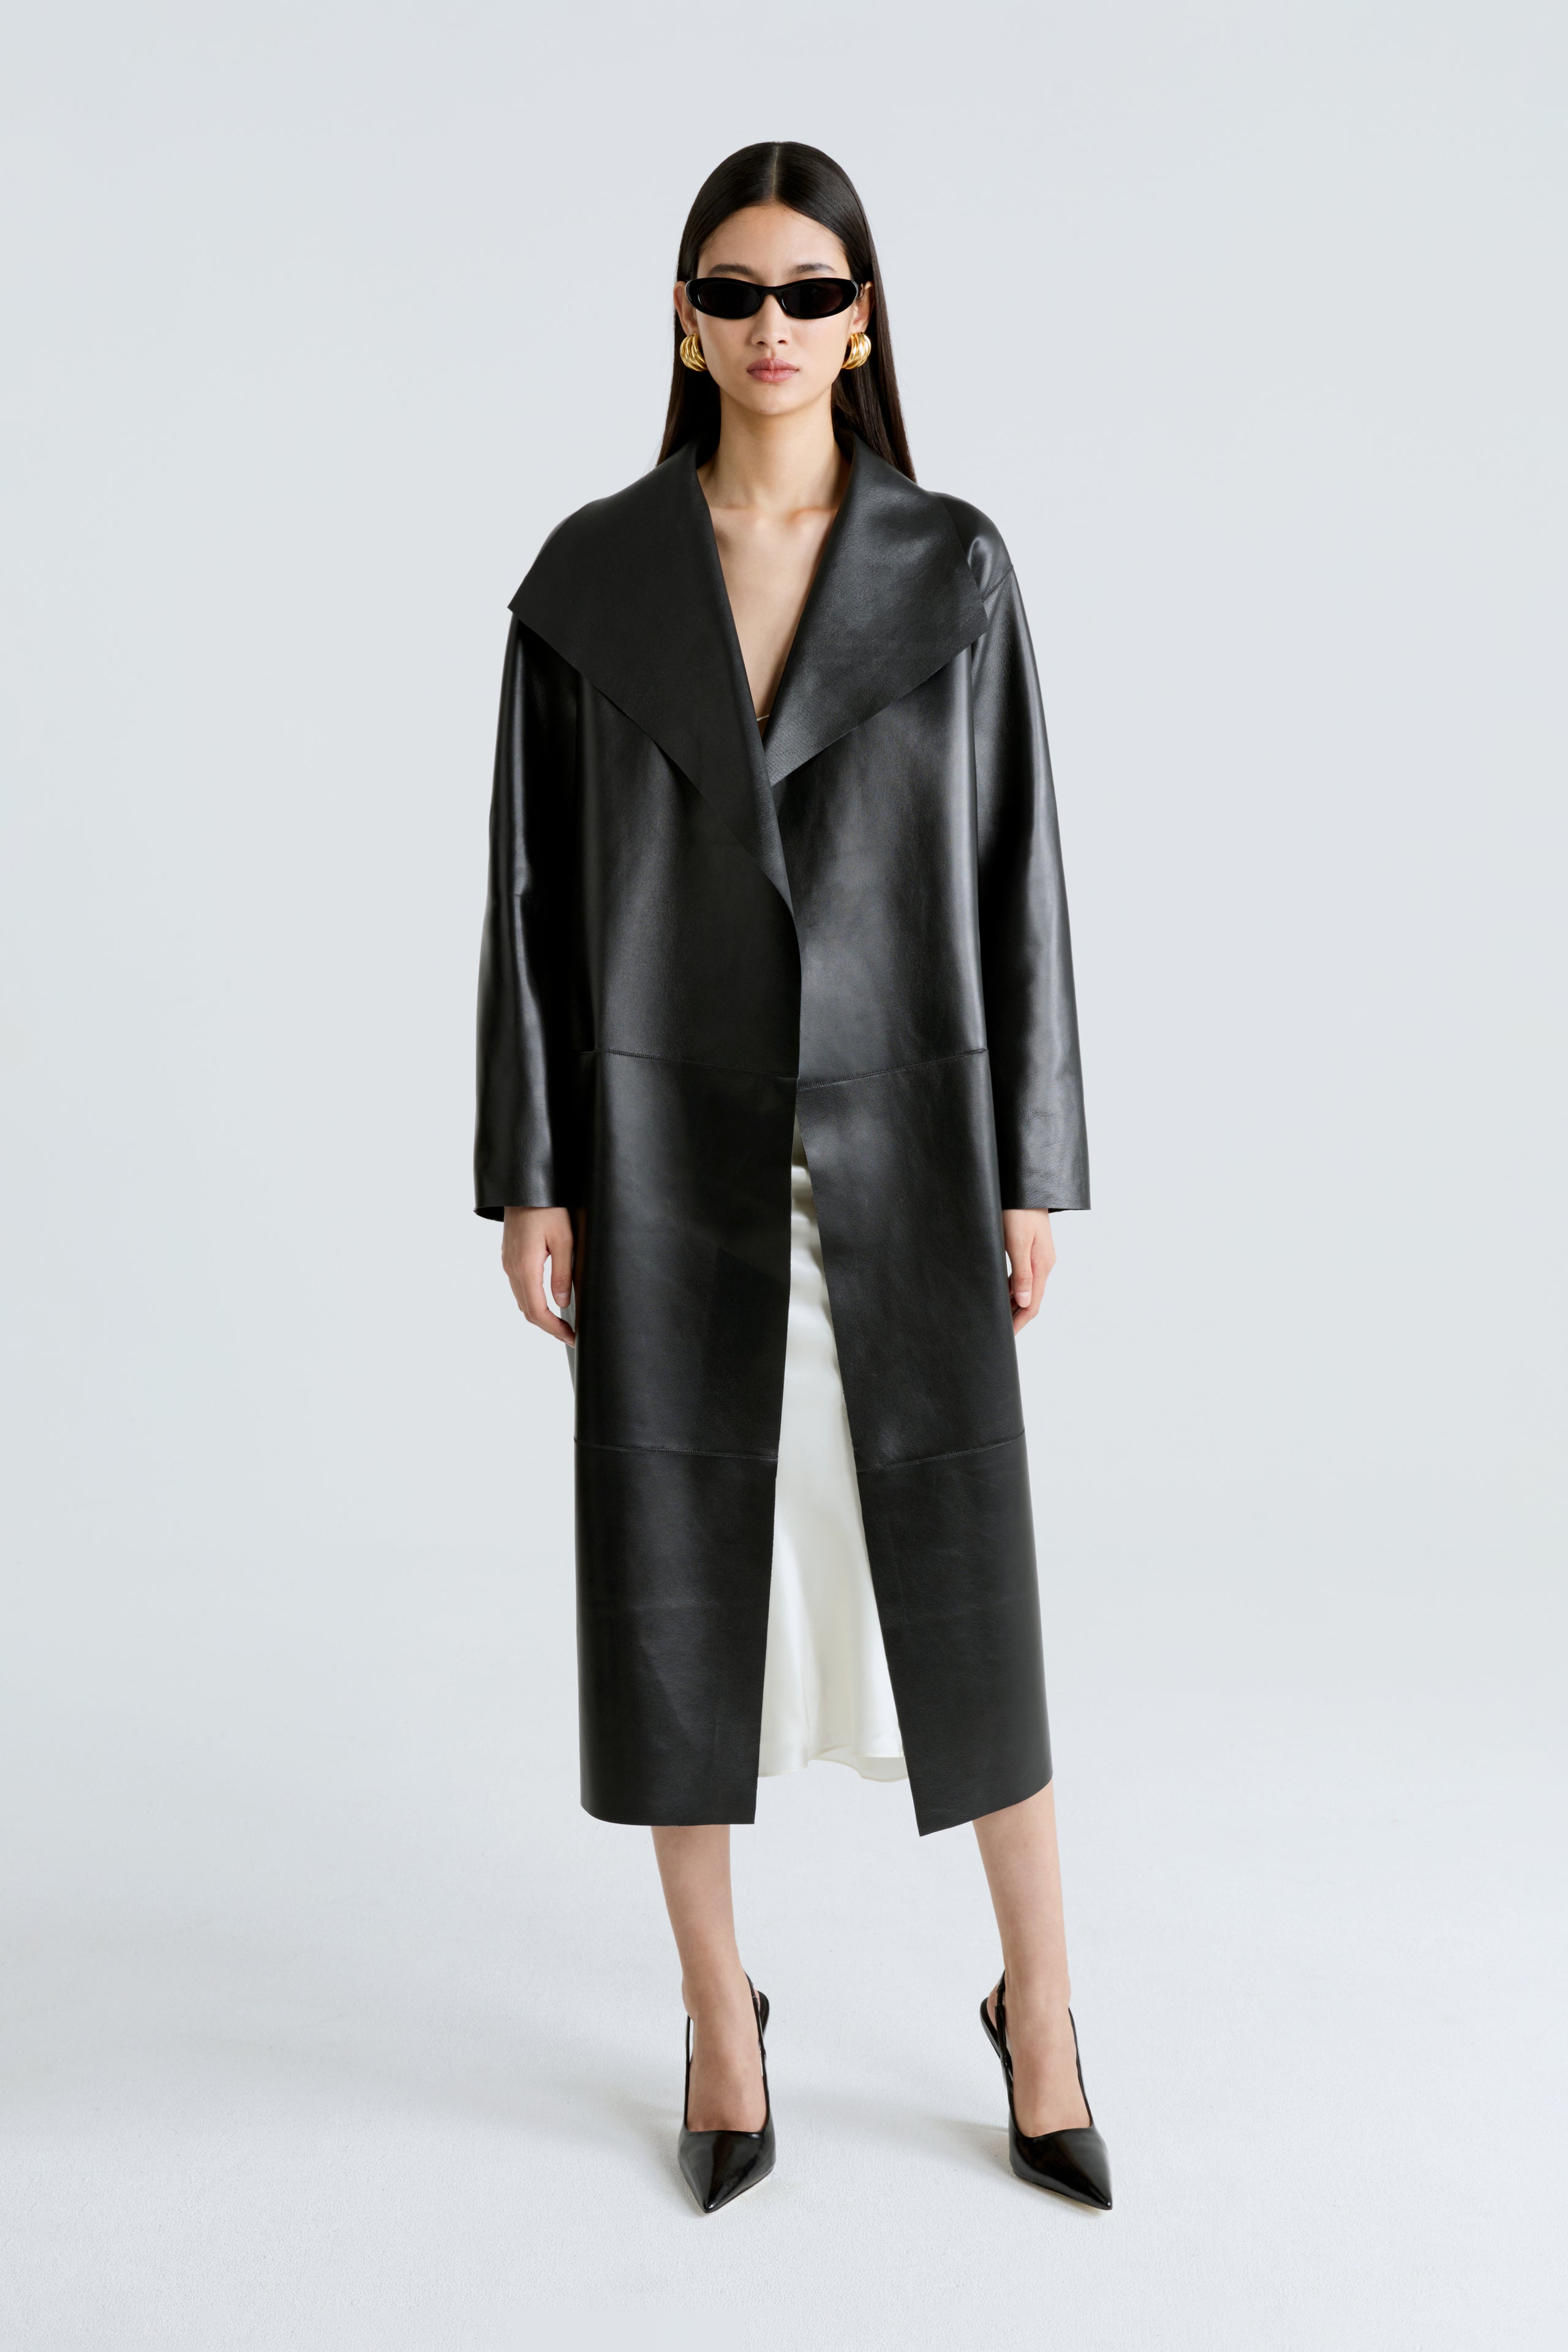 Model is wearing the Nour Hammour Birthday Coat Leather Black Draped Leather Coat Front